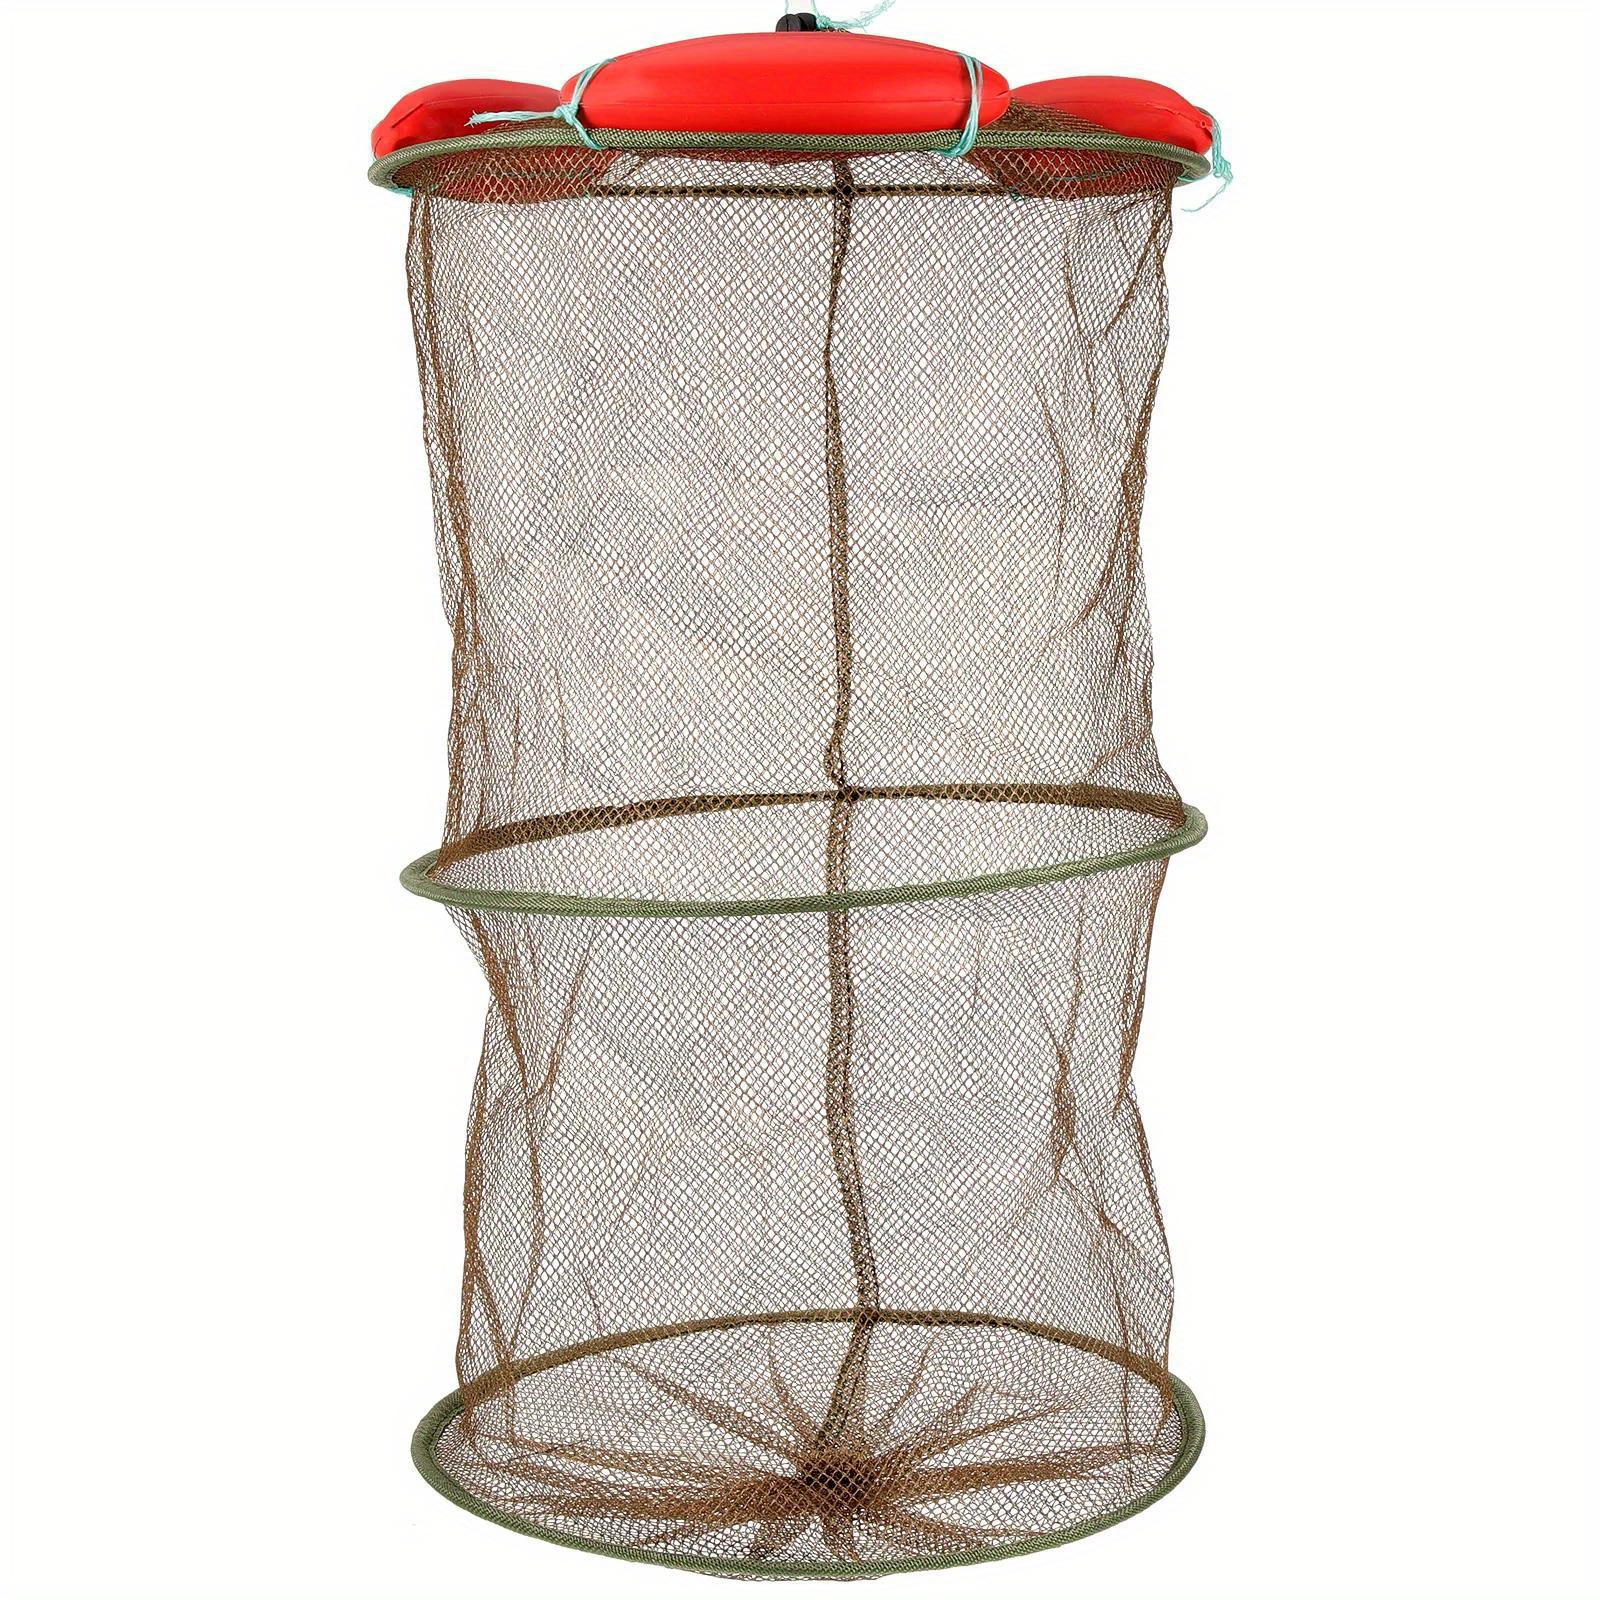 Metal Wire Fishing Cages Foldable Steel Net Fish Baskets Outdoor